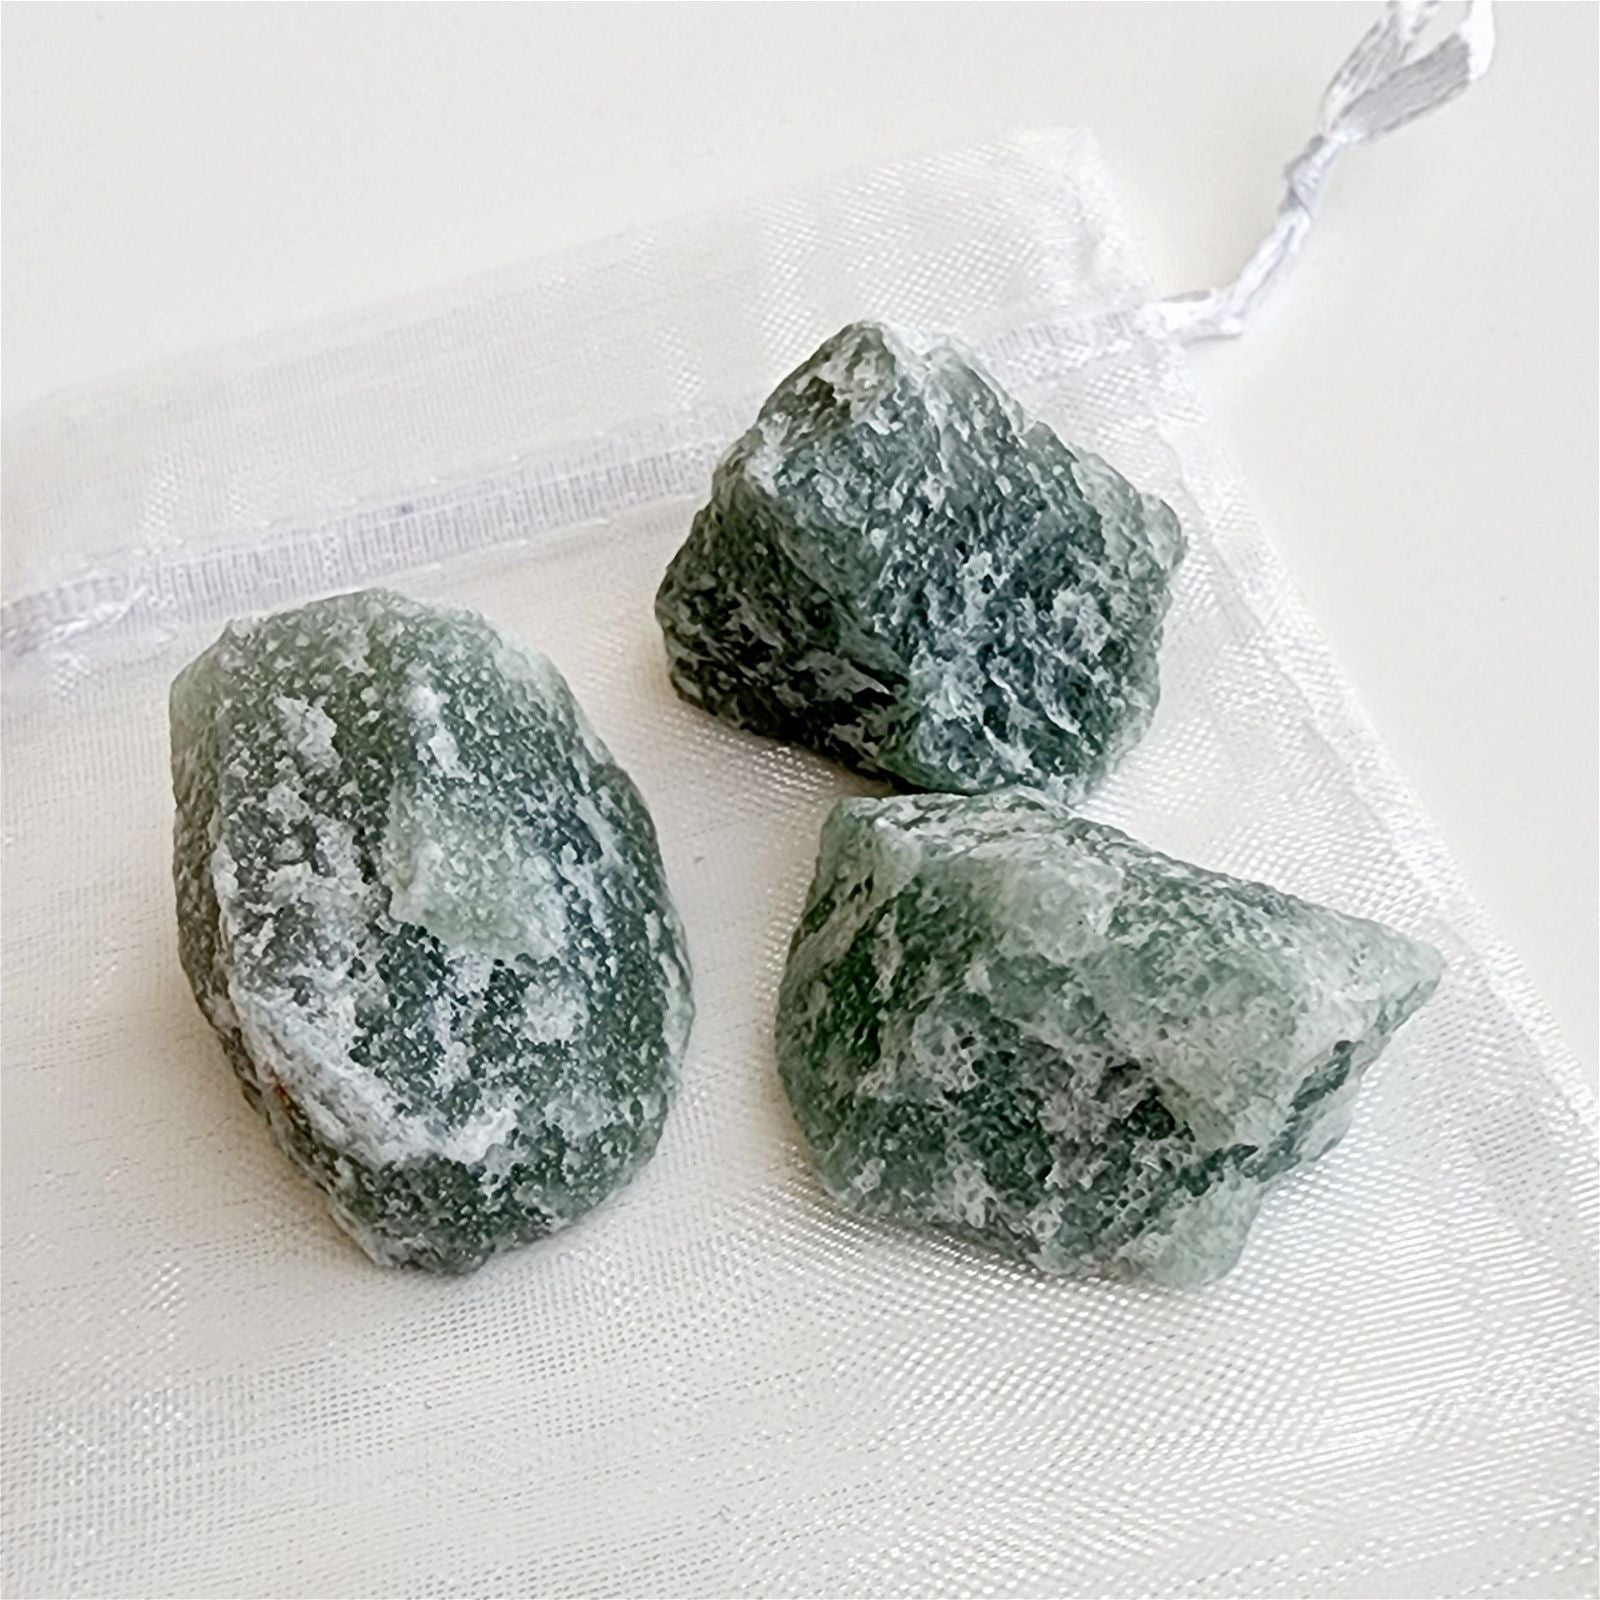 Aventurine Raw Crystals | Pack of 3 - D SCENT 